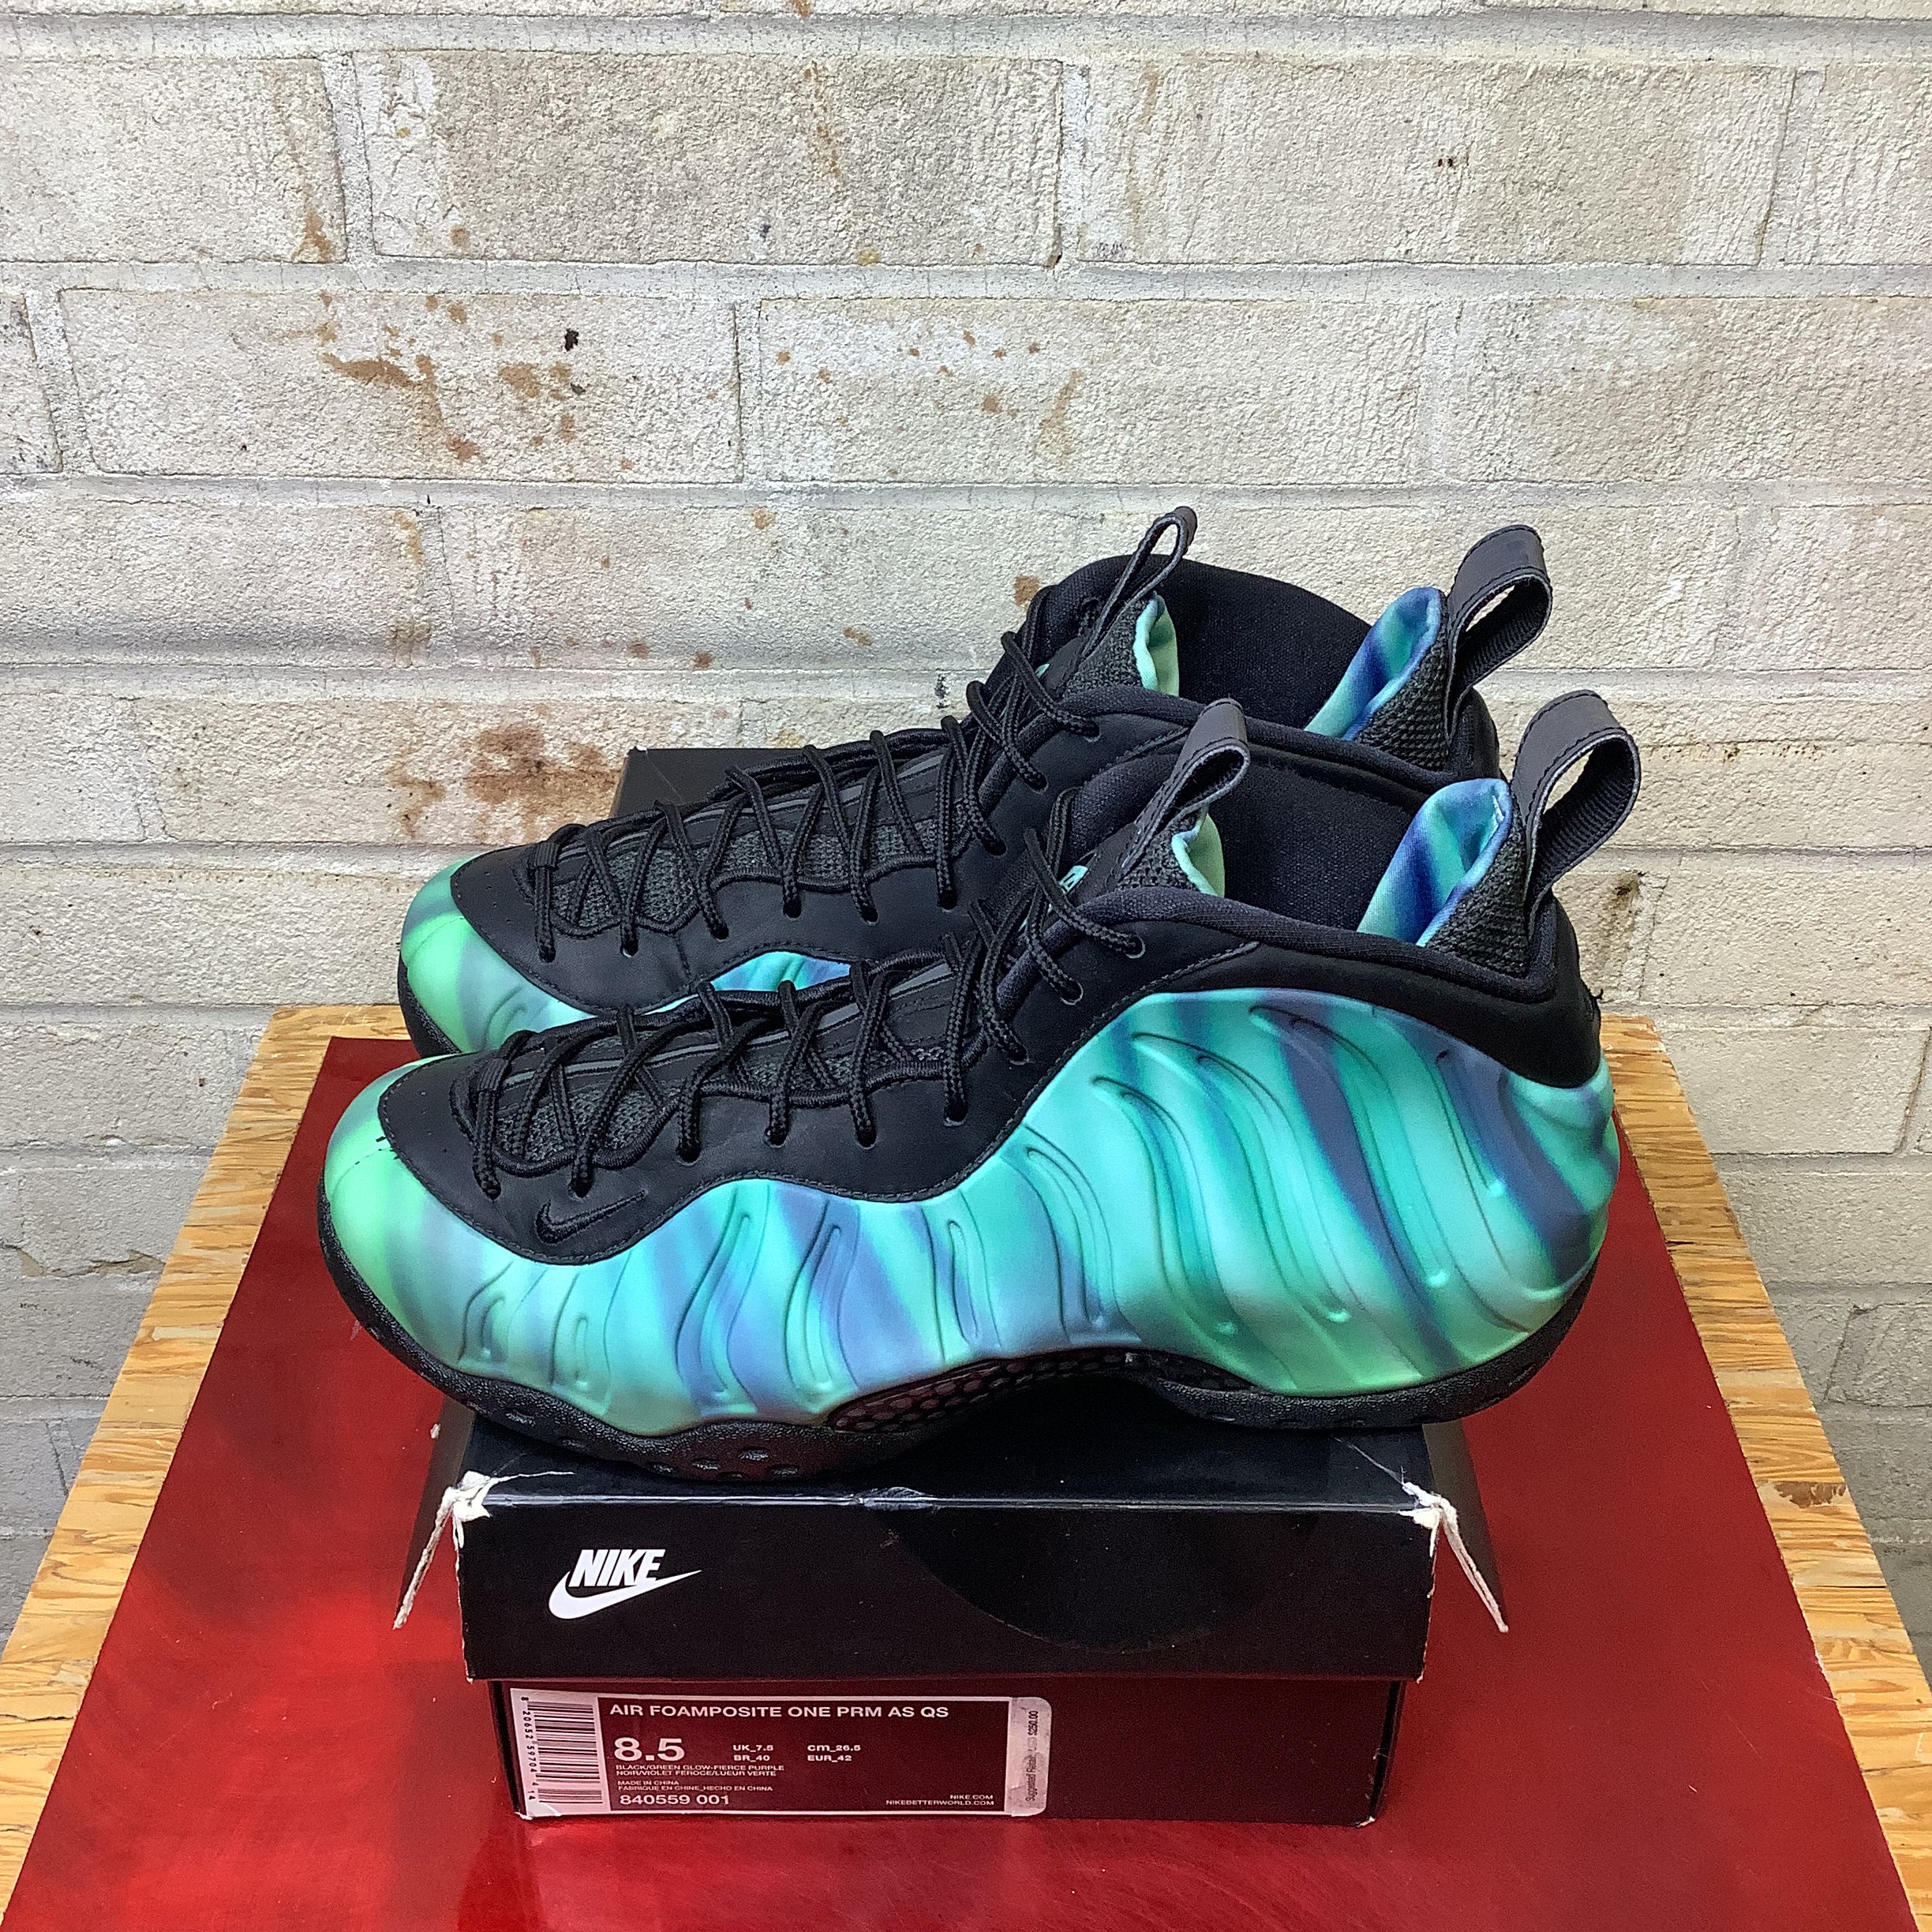 NIKE AIR FOAMPOSITE ONE NORTHERN LIGHTS SIZE 8.5 840559-001